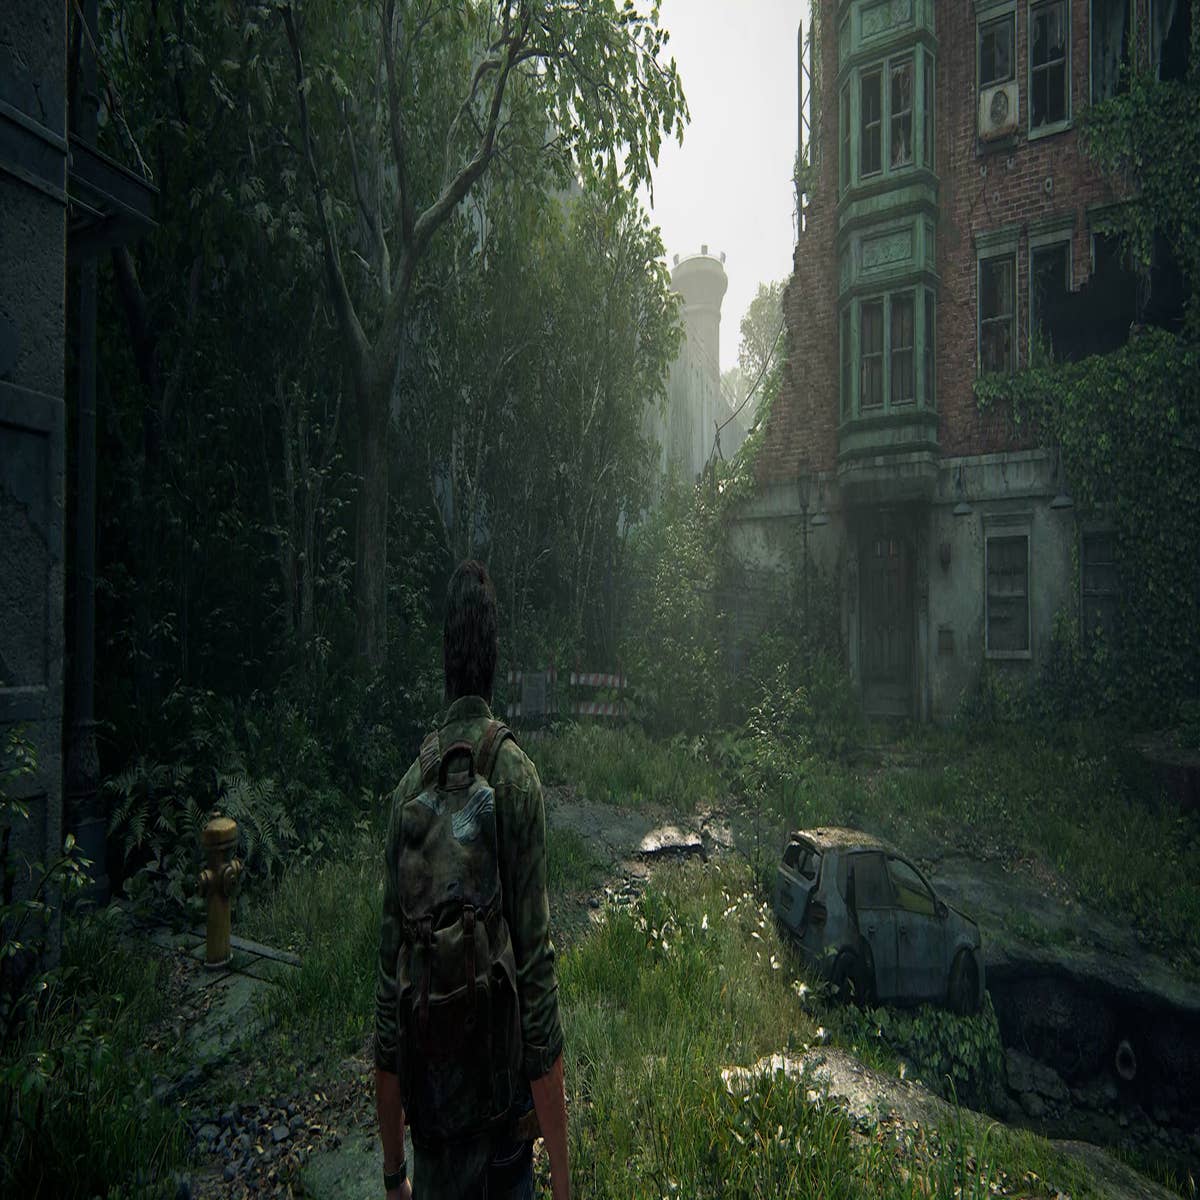 The Last of Us PC port is getting bad reviews on Steam - Xfire